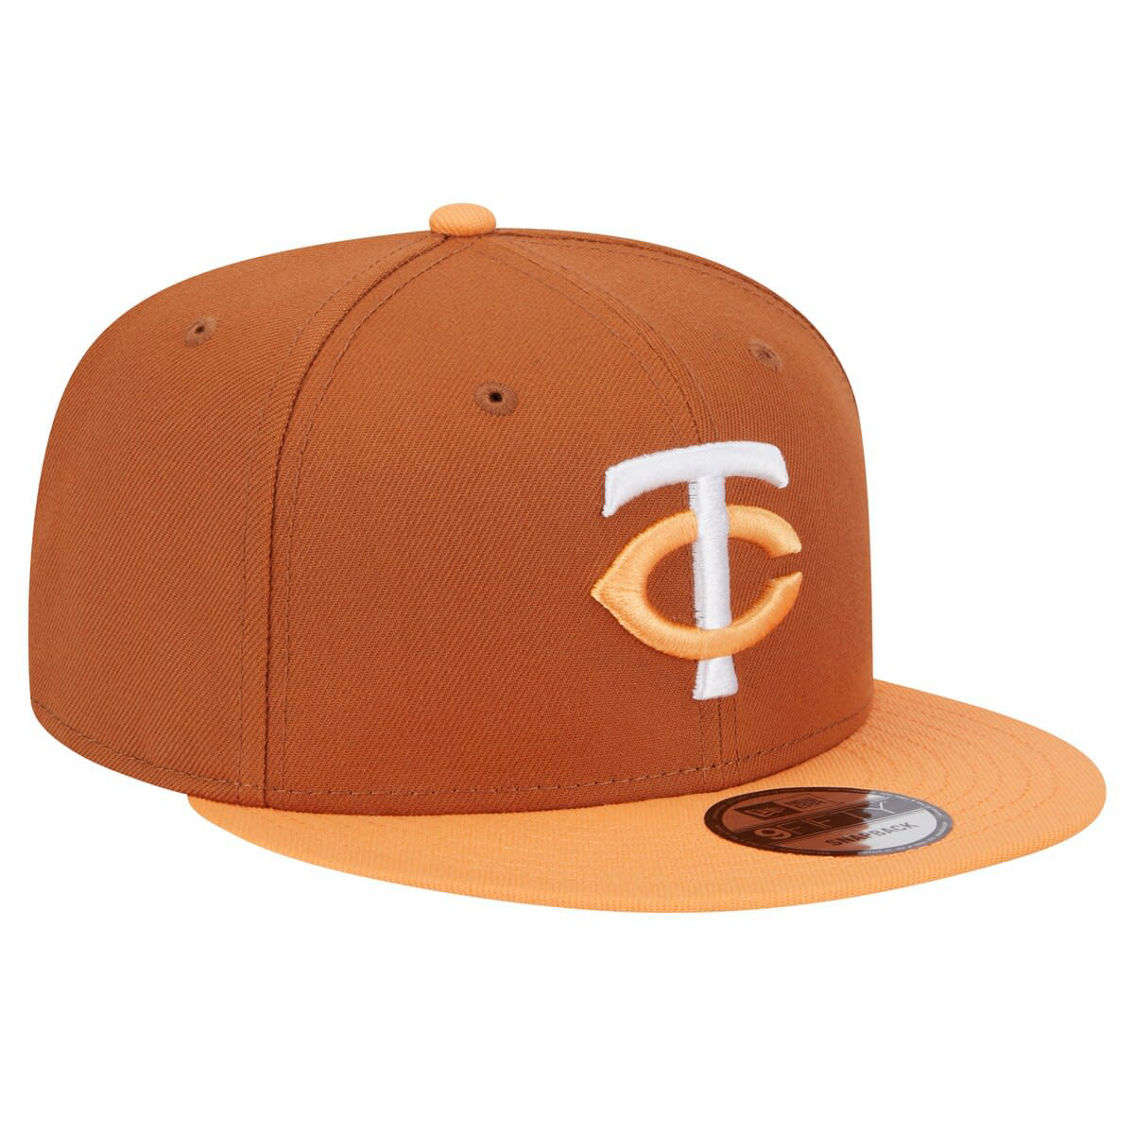 New Era Men's Brown Minnesota Twins Spring Color Two-Tone 9FIFTY Snapback Hat - Image 4 of 4